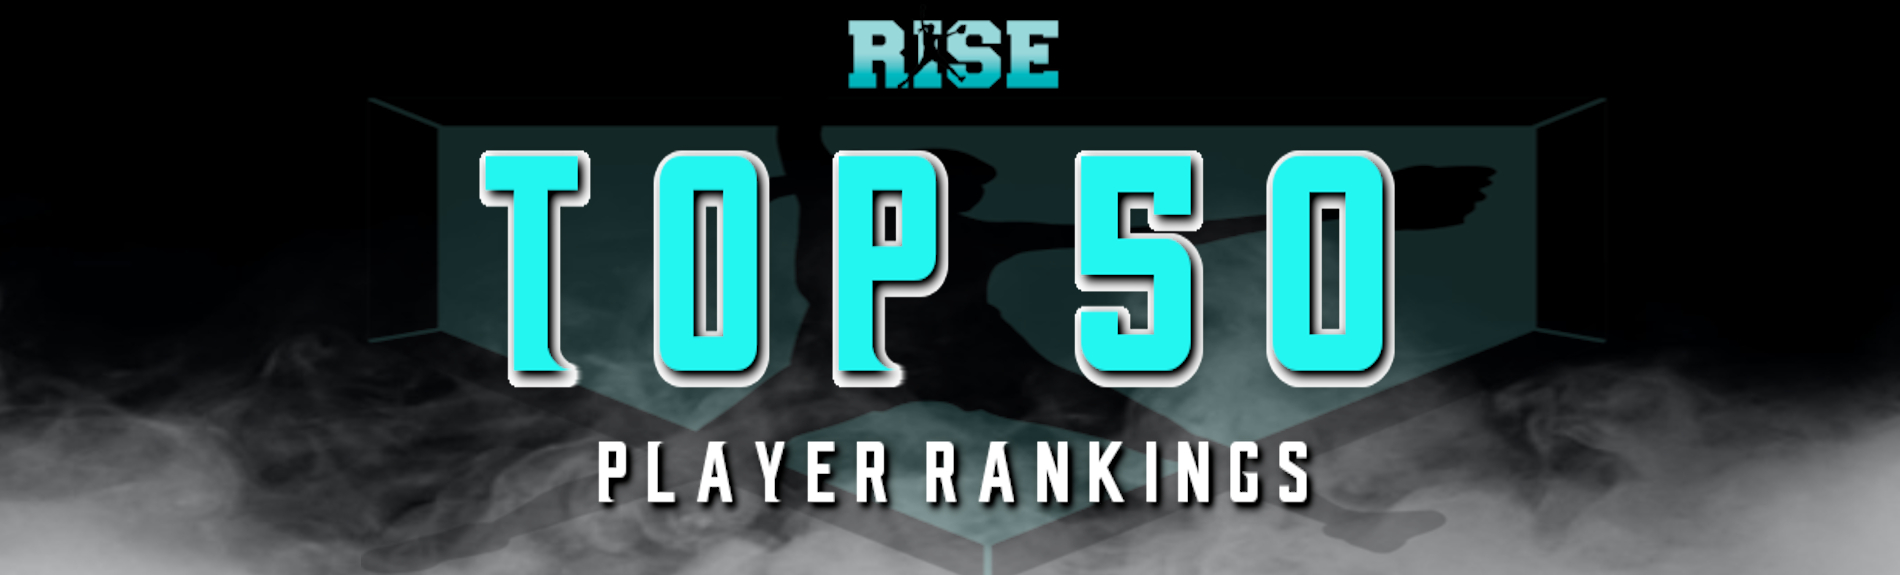 RISE “Top 50” UPDATED Player Rankings-(January 1st, 2022)